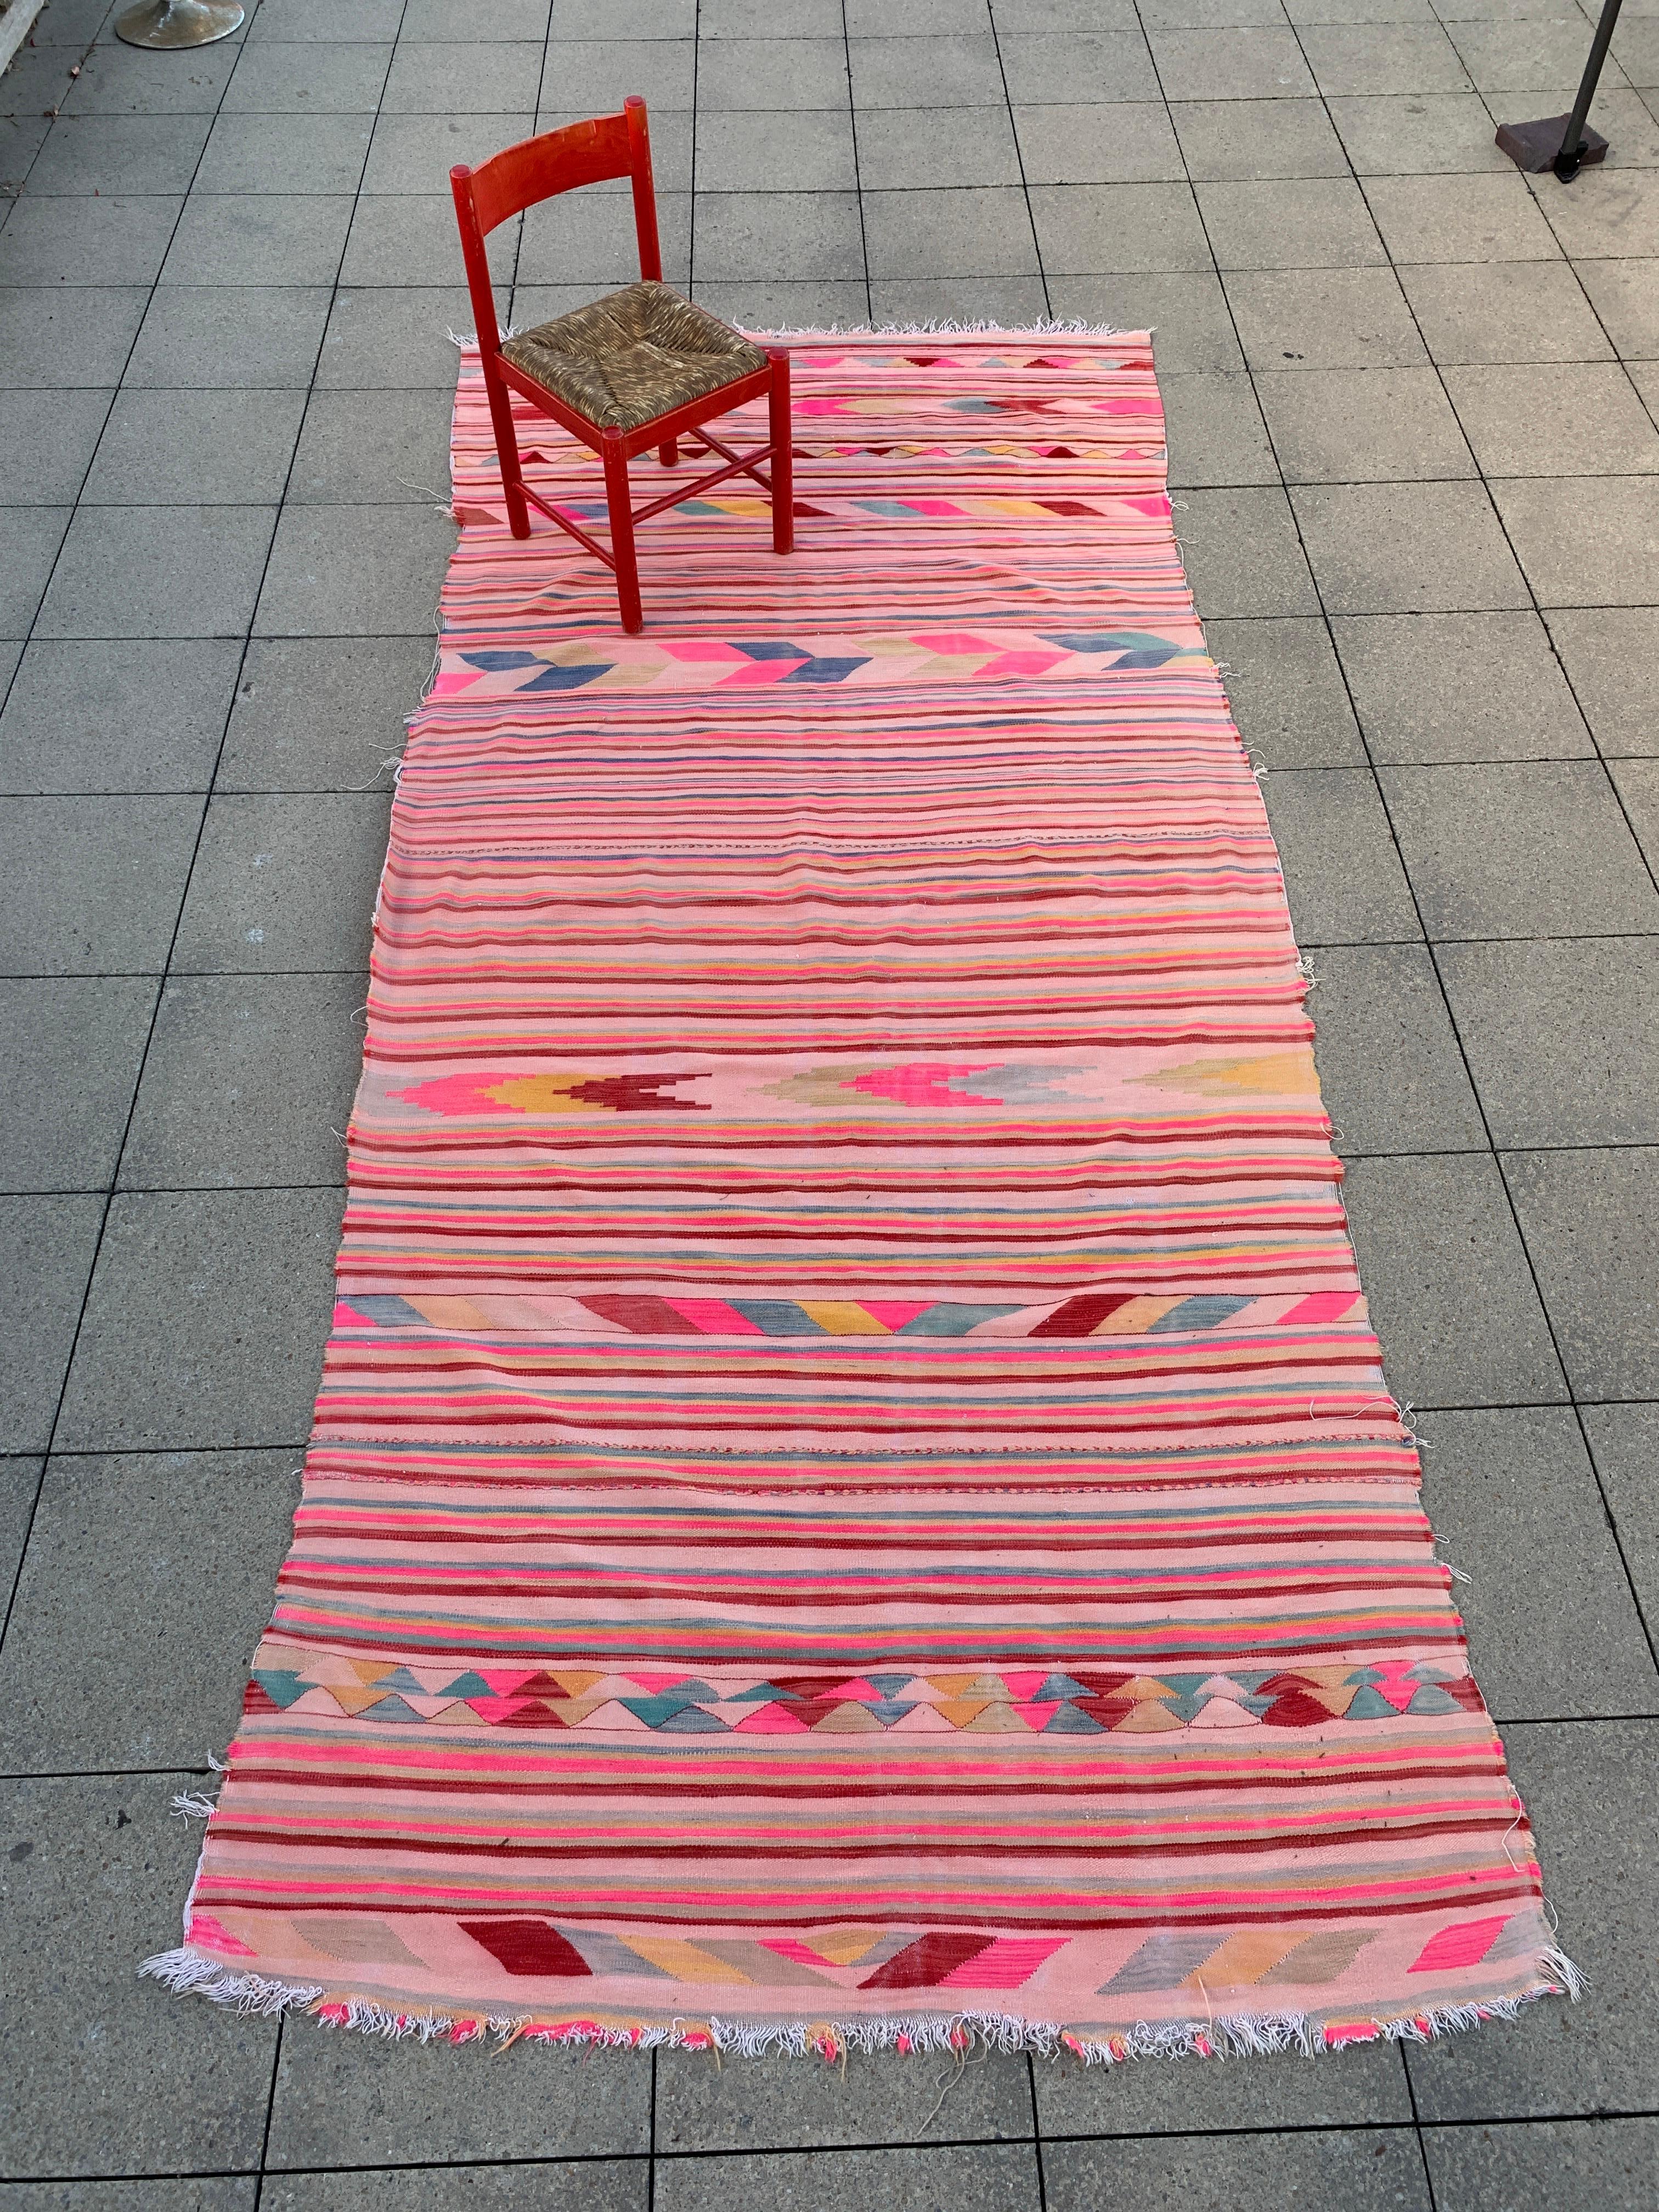 Explore the heritage of North African craftsmanship with this vintage Berber rug from 1960s Algeria. Featuring long, striped patterns and occasional diamonds and arrows, this unique piece is set on a light pink base.

The rug's dominant hot pink,